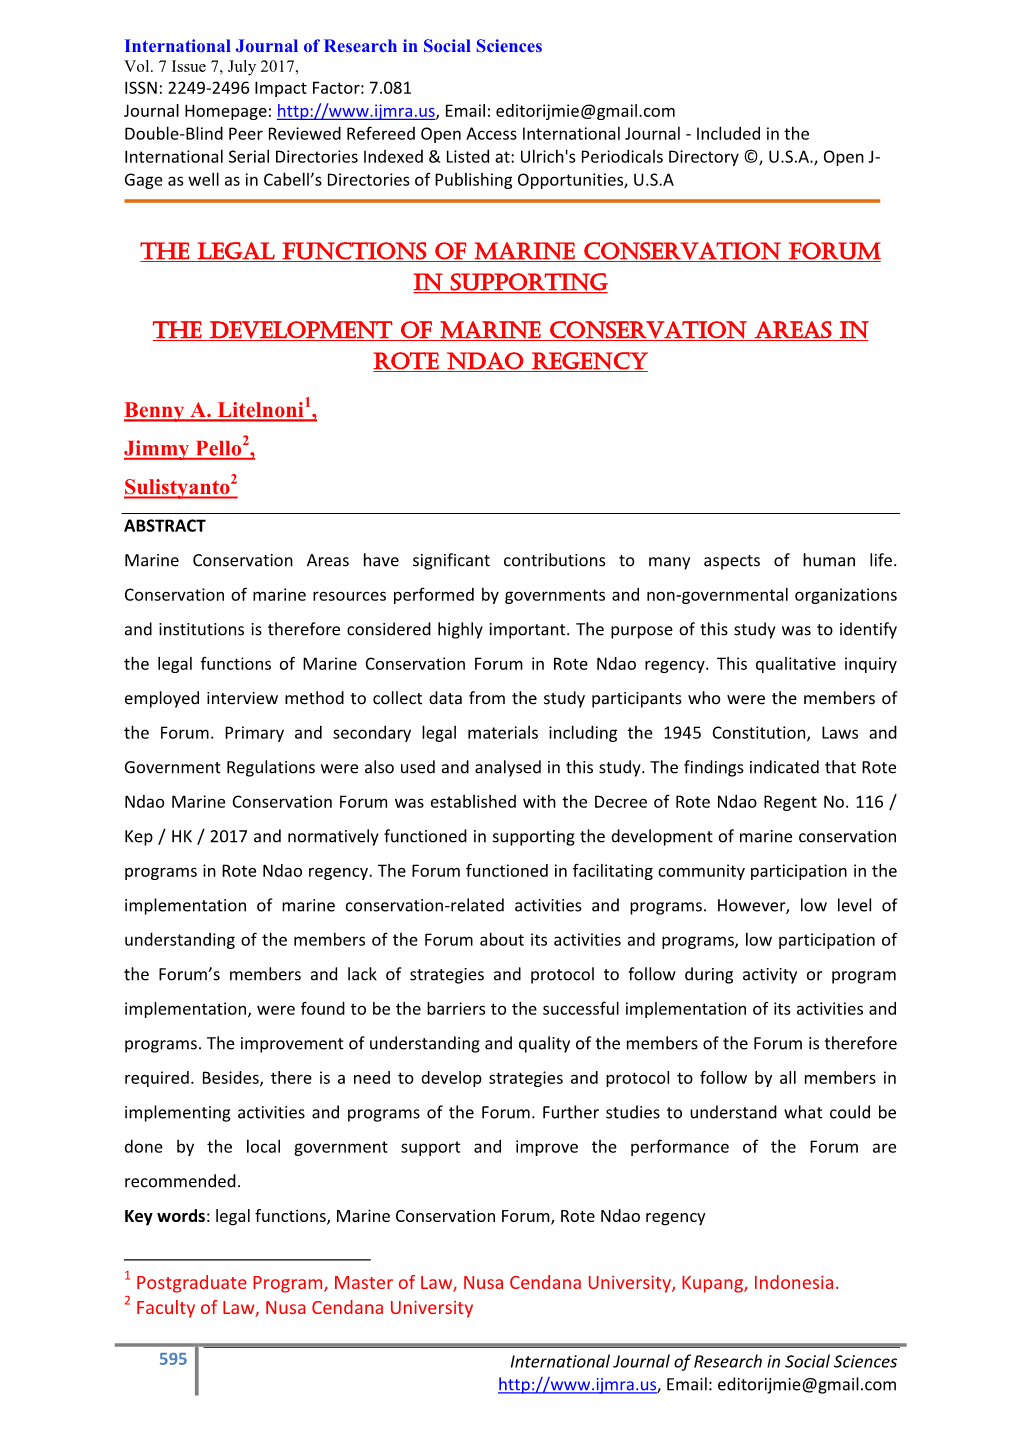 The Legal Functions of Marine Conservation Forum in Supporting